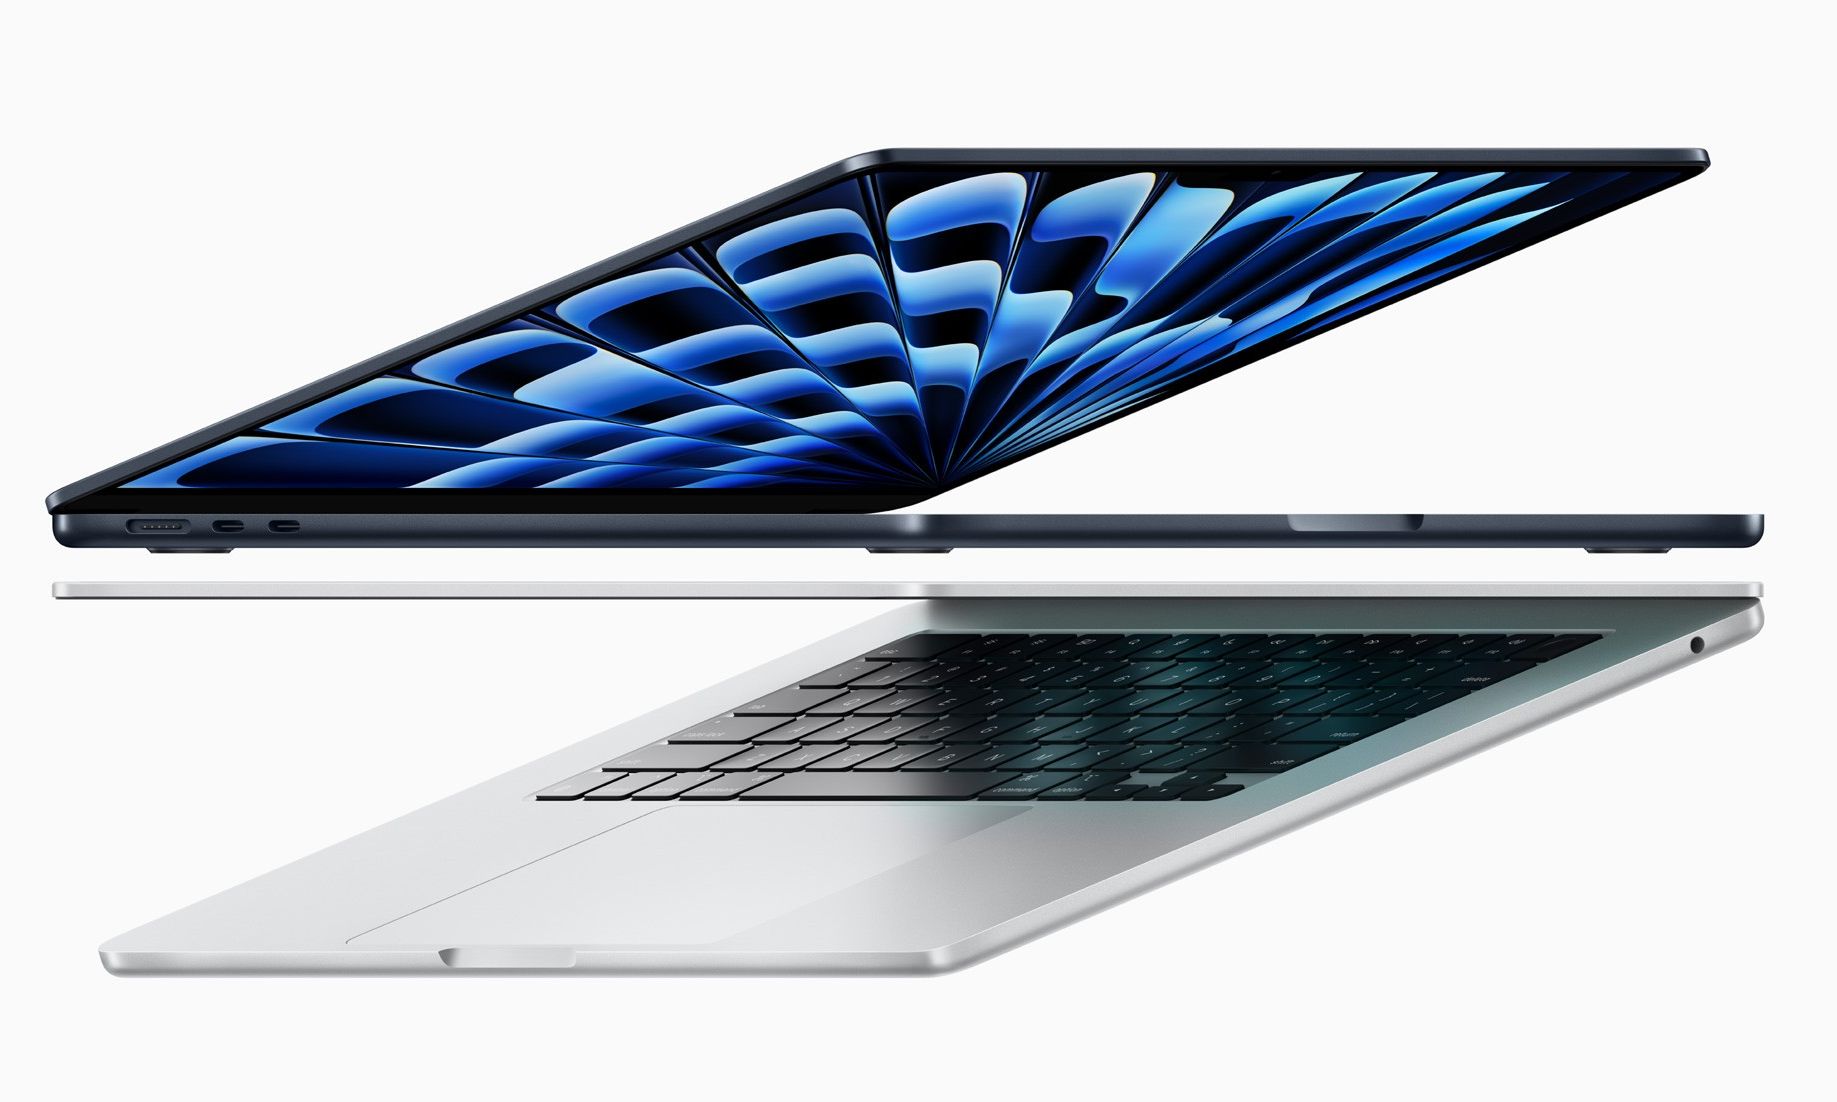 two macbook air m3 models pictured in a promotional image from apple